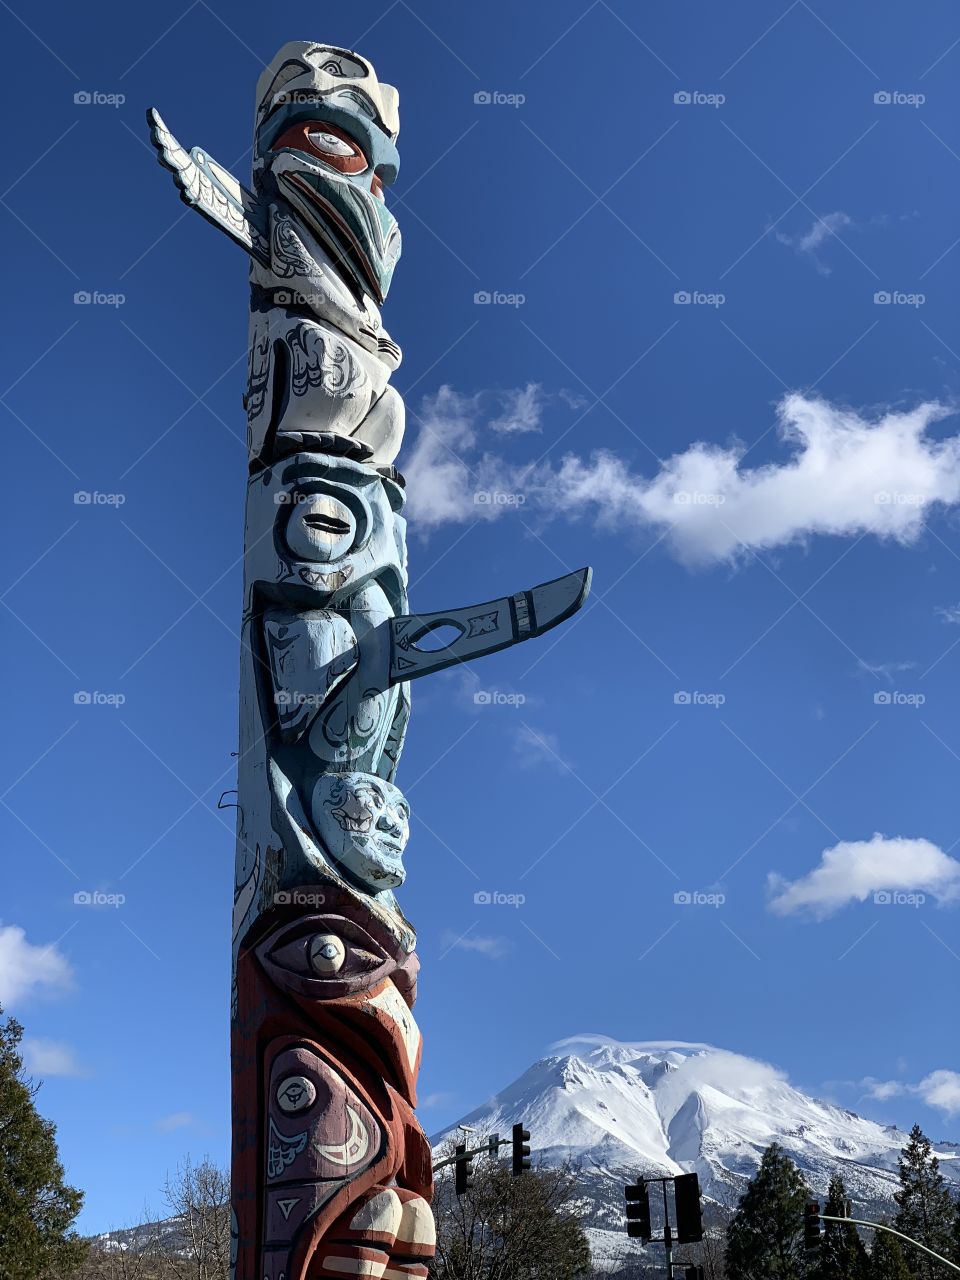 Totem Pole stretched up high with blue skies in Mt Shasta